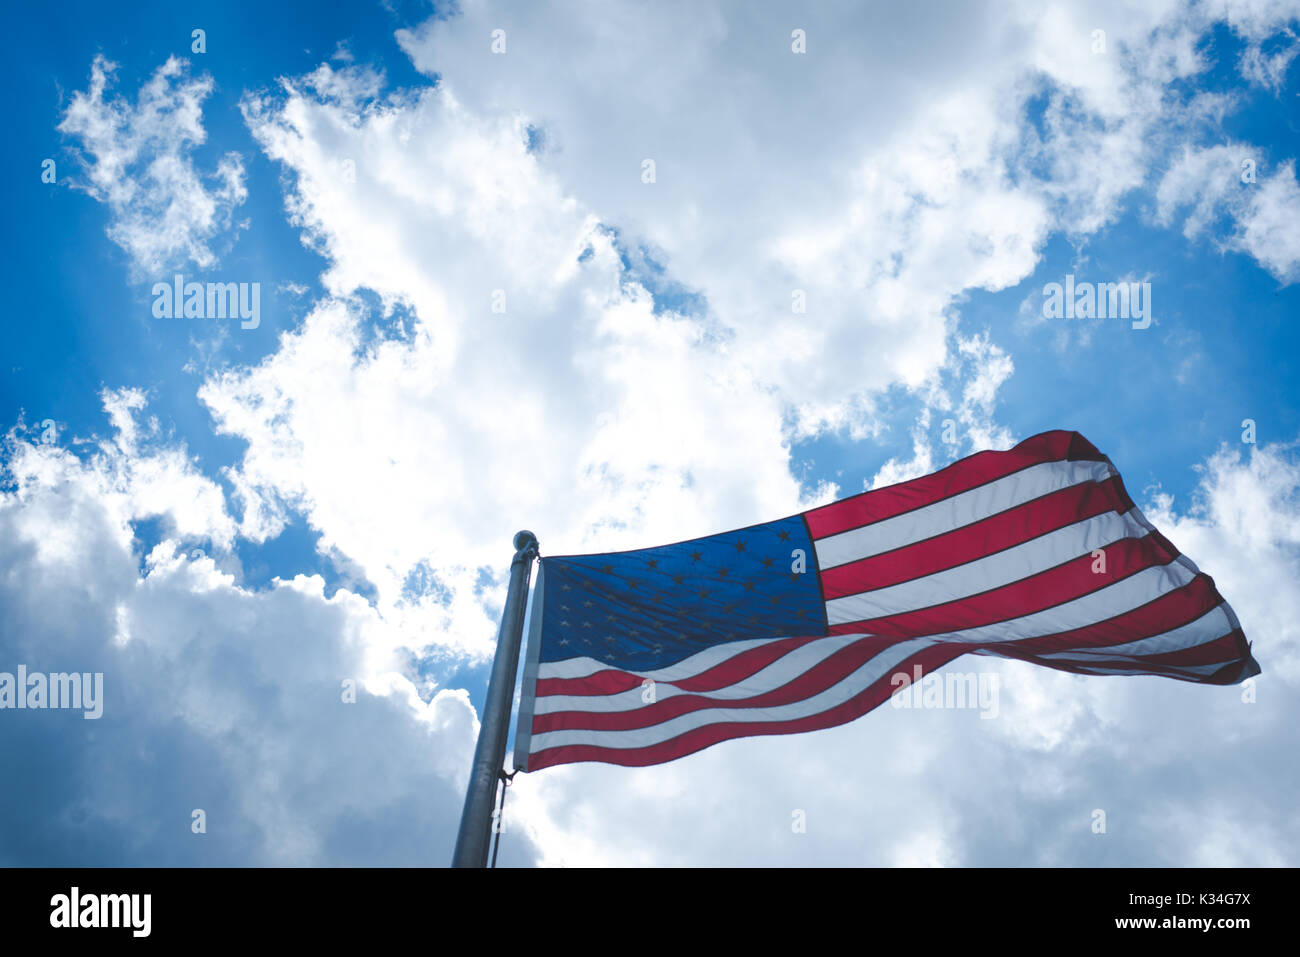 An American flag blows in the wind against a blue sky with clouds. Stock Photo